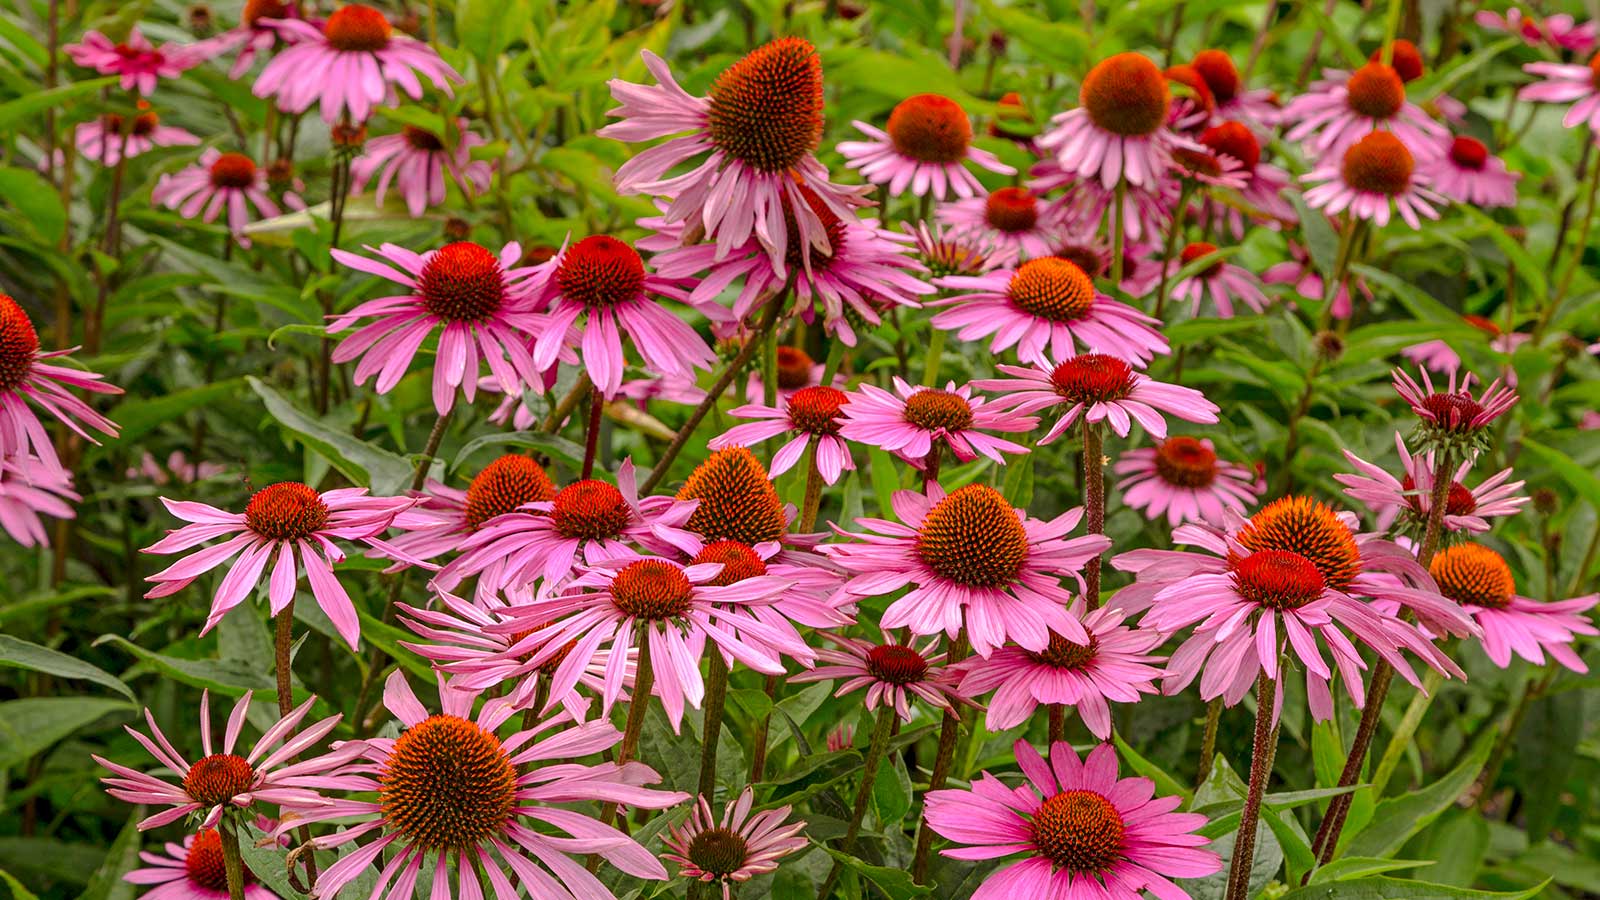 How to deadhead coneflowers – simple tips from the experts